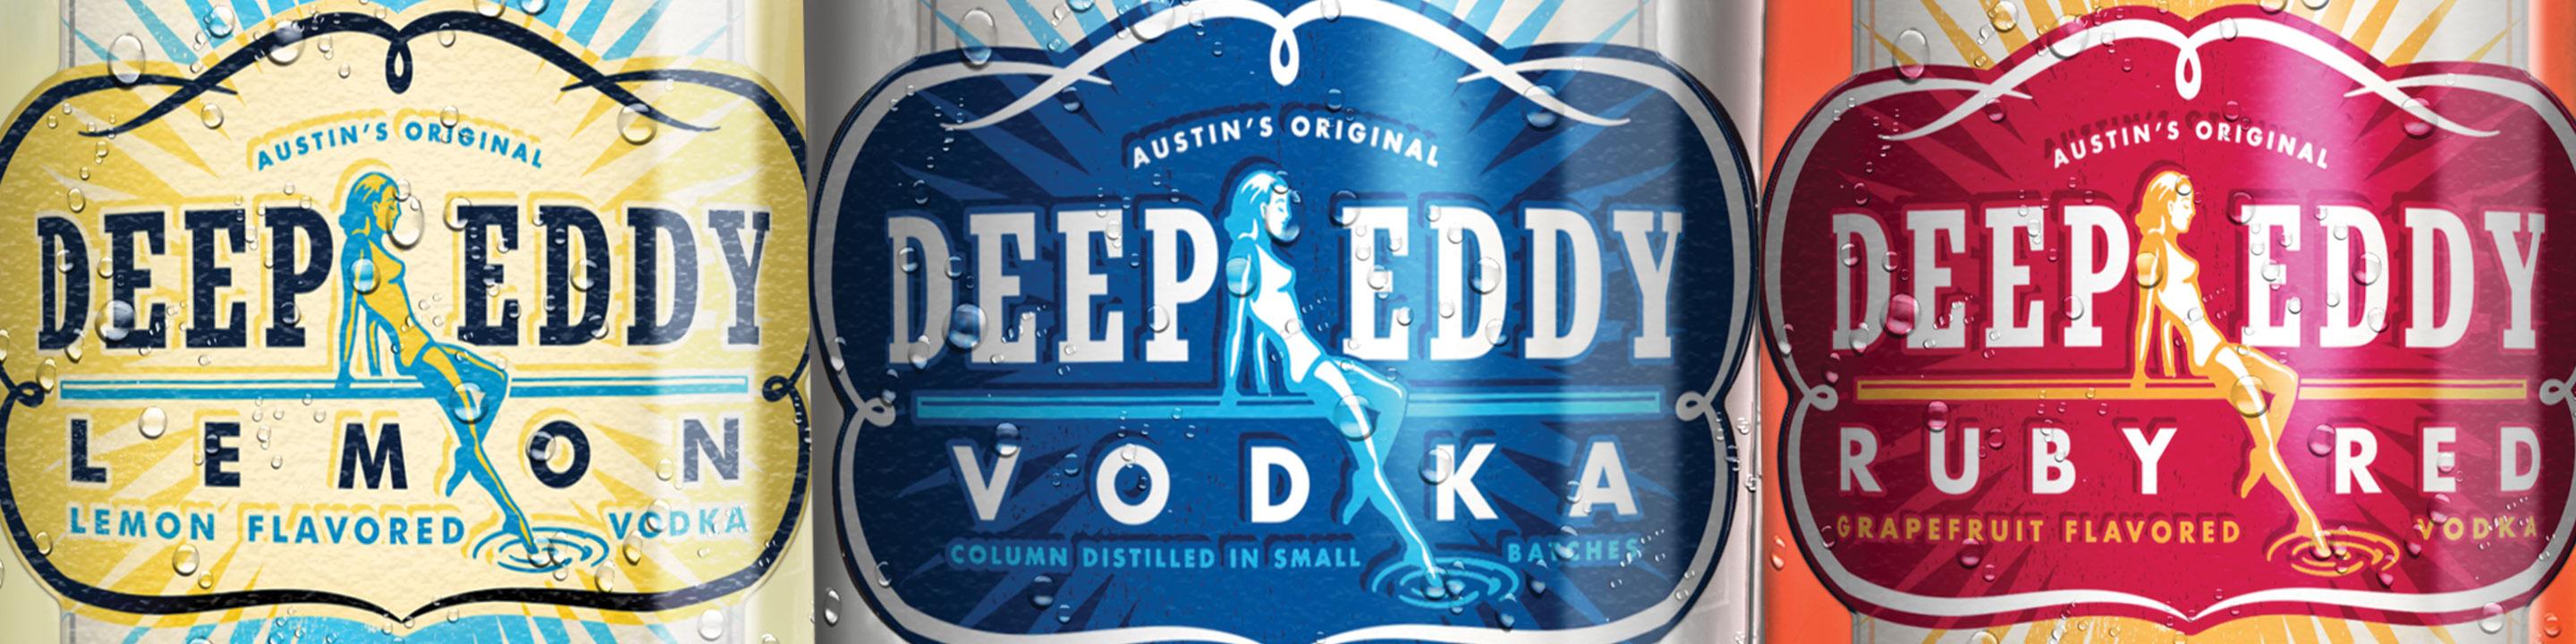 Taste the Deep Eddy Difference

Deep Eddy Vodka is made with all-natural ingredients and real fruit juice. You won’t find high-fructose corn syrup or processed sweeteners in this vodka. Being 10x distilled and 8x filtered removes the impurities ensuring a nice, smooth finish